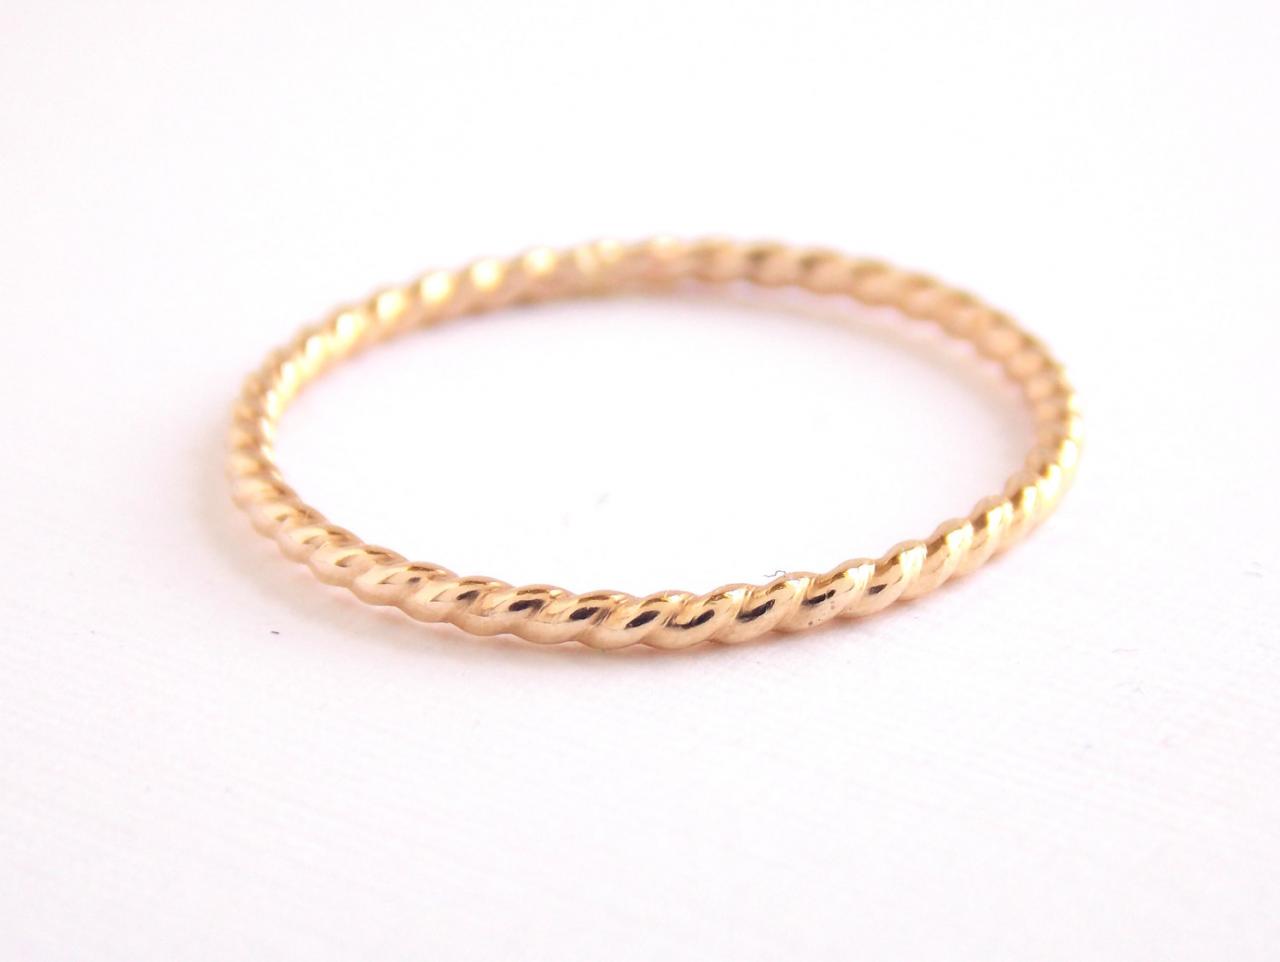 Gold-filled Simple Twist Ring - 14k Gold-filled Ring, Dainty Ring, Simple Ring, Stacking Ring, Skinny Ring, Gold Ring, Small Ring